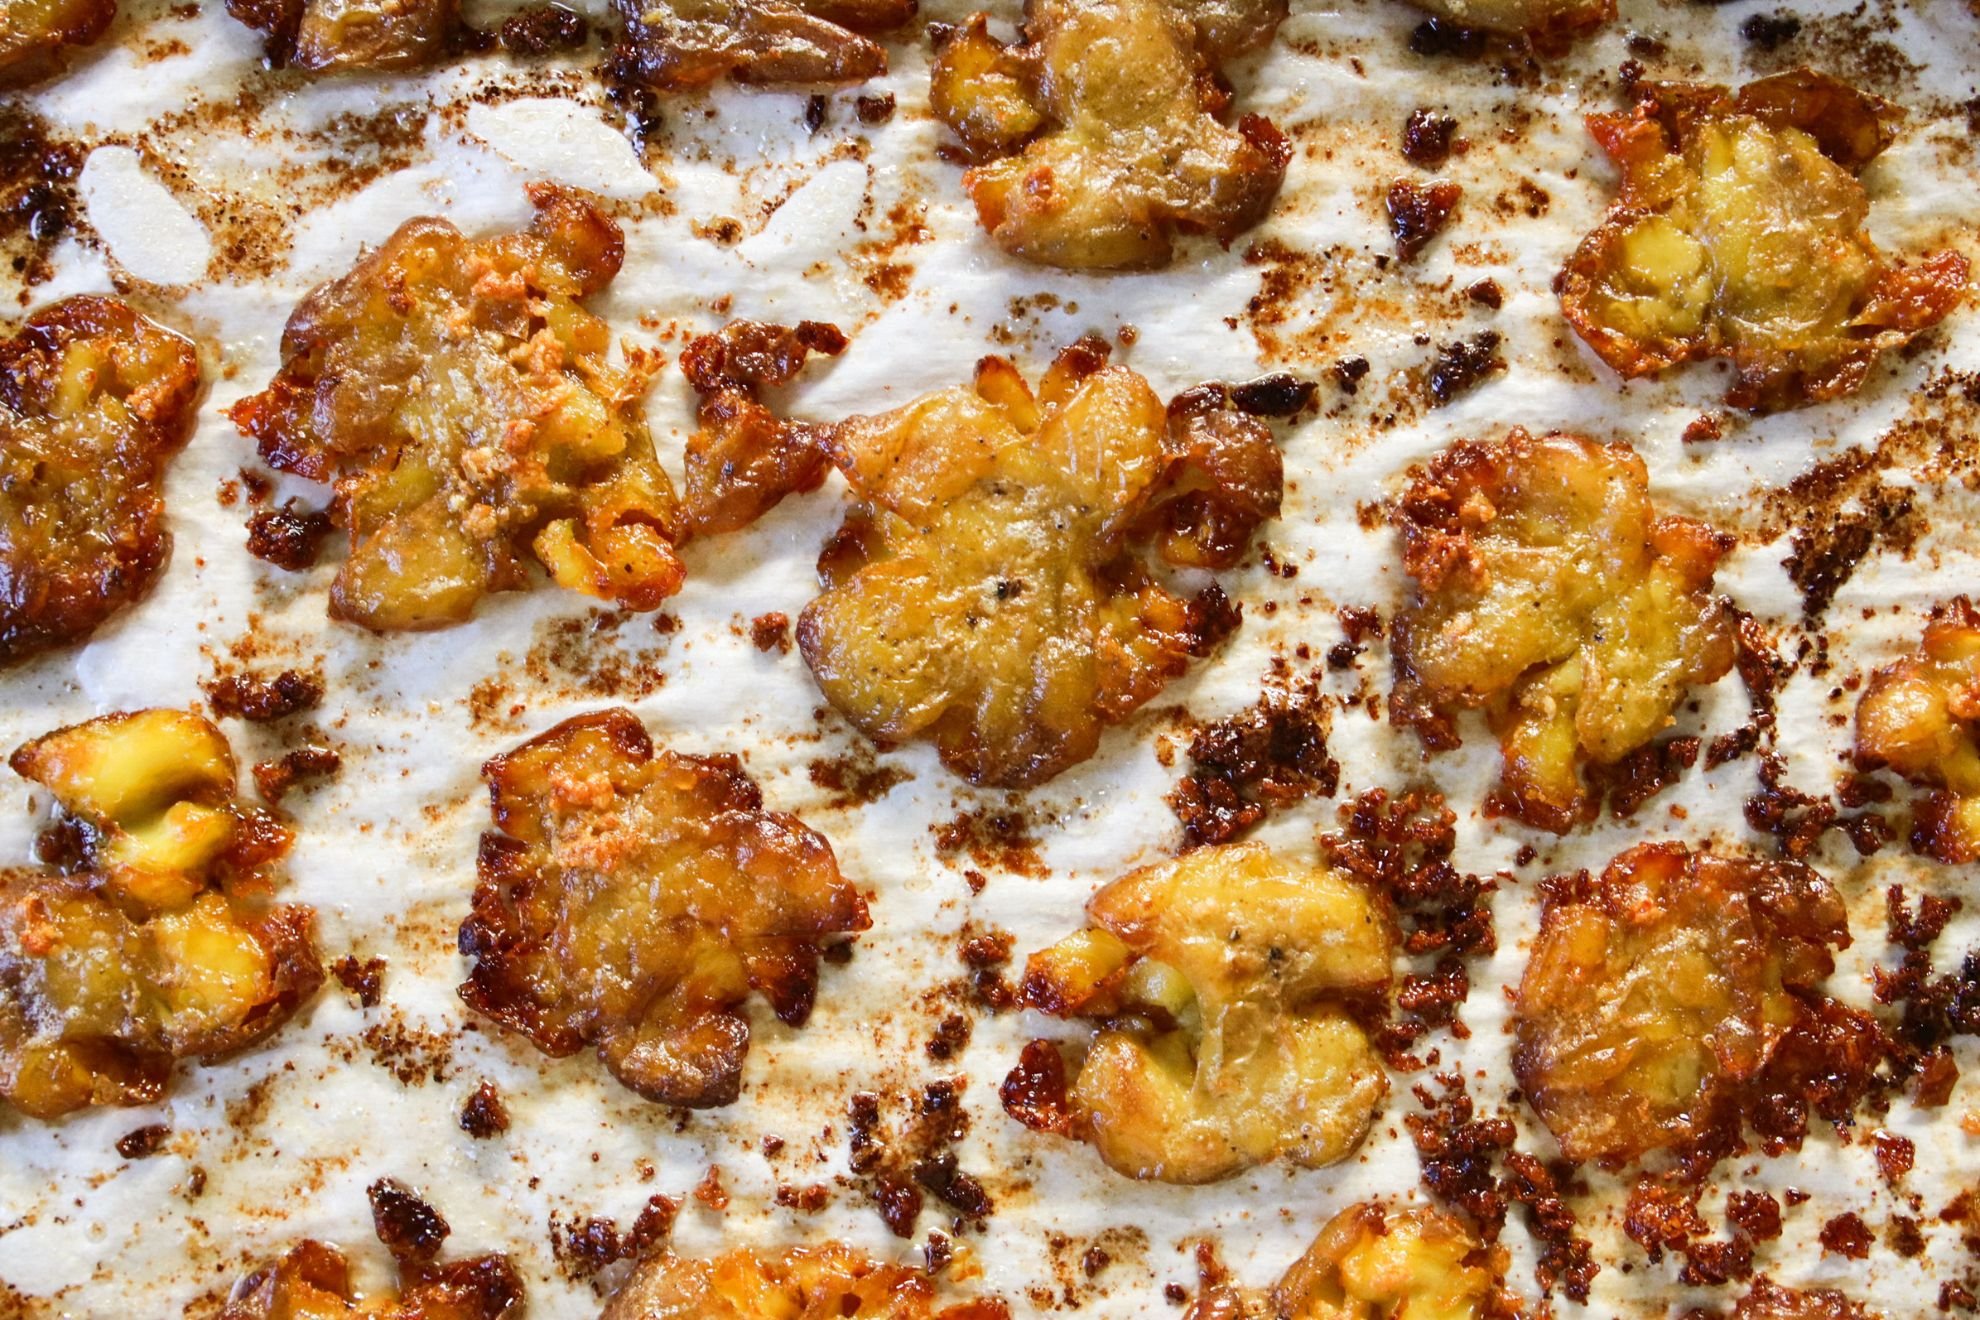 This is an overhead horizontal image of crispy roasted smashed potatoes on a white piece of parchment paper.